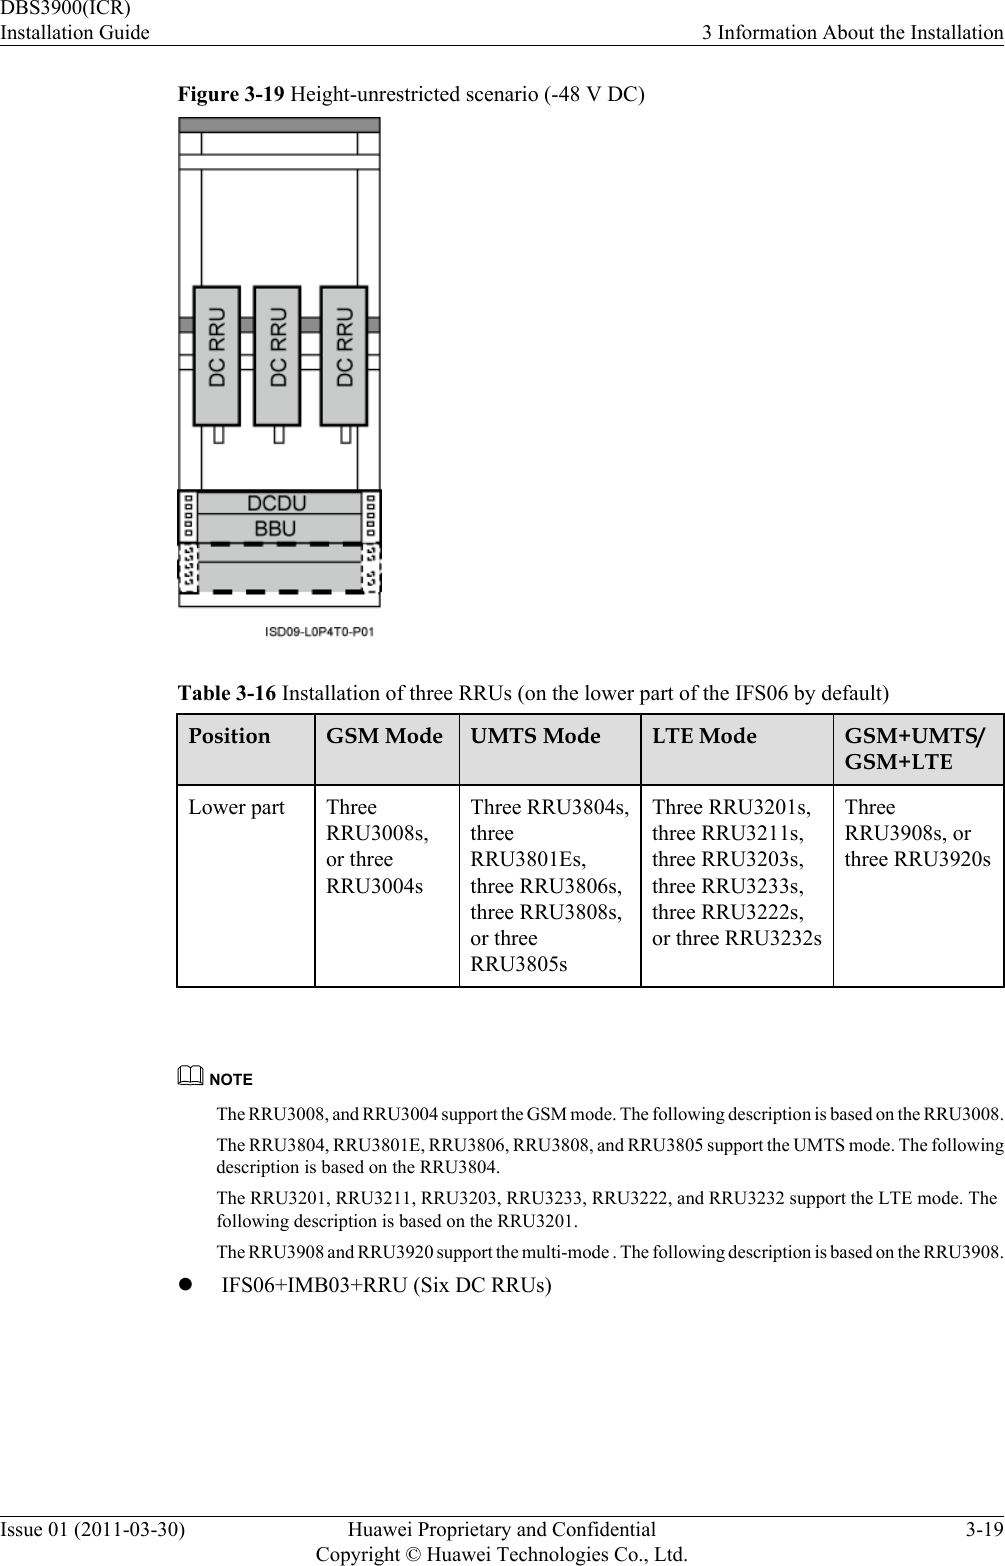 Figure 3-19 Height-unrestricted scenario (-48 V DC)Table 3-16 Installation of three RRUs (on the lower part of the IFS06 by default)Position GSM Mode UMTS Mode LTE Mode GSM+UMTS/GSM+LTELower part ThreeRRU3008s,or threeRRU3004sThree RRU3804s,threeRRU3801Es,three RRU3806s,three RRU3808s,or threeRRU3805sThree RRU3201s,three RRU3211s,three RRU3203s,three RRU3233s,three RRU3222s,or three RRU3232sThreeRRU3908s, orthree RRU3920s NOTEThe RRU3008, and RRU3004 support the GSM mode. The following description is based on the RRU3008.The RRU3804, RRU3801E, RRU3806, RRU3808, and RRU3805 support the UMTS mode. The followingdescription is based on the RRU3804.The RRU3201, RRU3211, RRU3203, RRU3233, RRU3222, and RRU3232 support the LTE mode. Thefollowing description is based on the RRU3201.The RRU3908 and RRU3920 support the multi-mode . The following description is based on the RRU3908.lIFS06+IMB03+RRU (Six DC RRUs)DBS3900(ICR)Installation Guide 3 Information About the InstallationIssue 01 (2011-03-30) Huawei Proprietary and ConfidentialCopyright © Huawei Technologies Co., Ltd.3-19